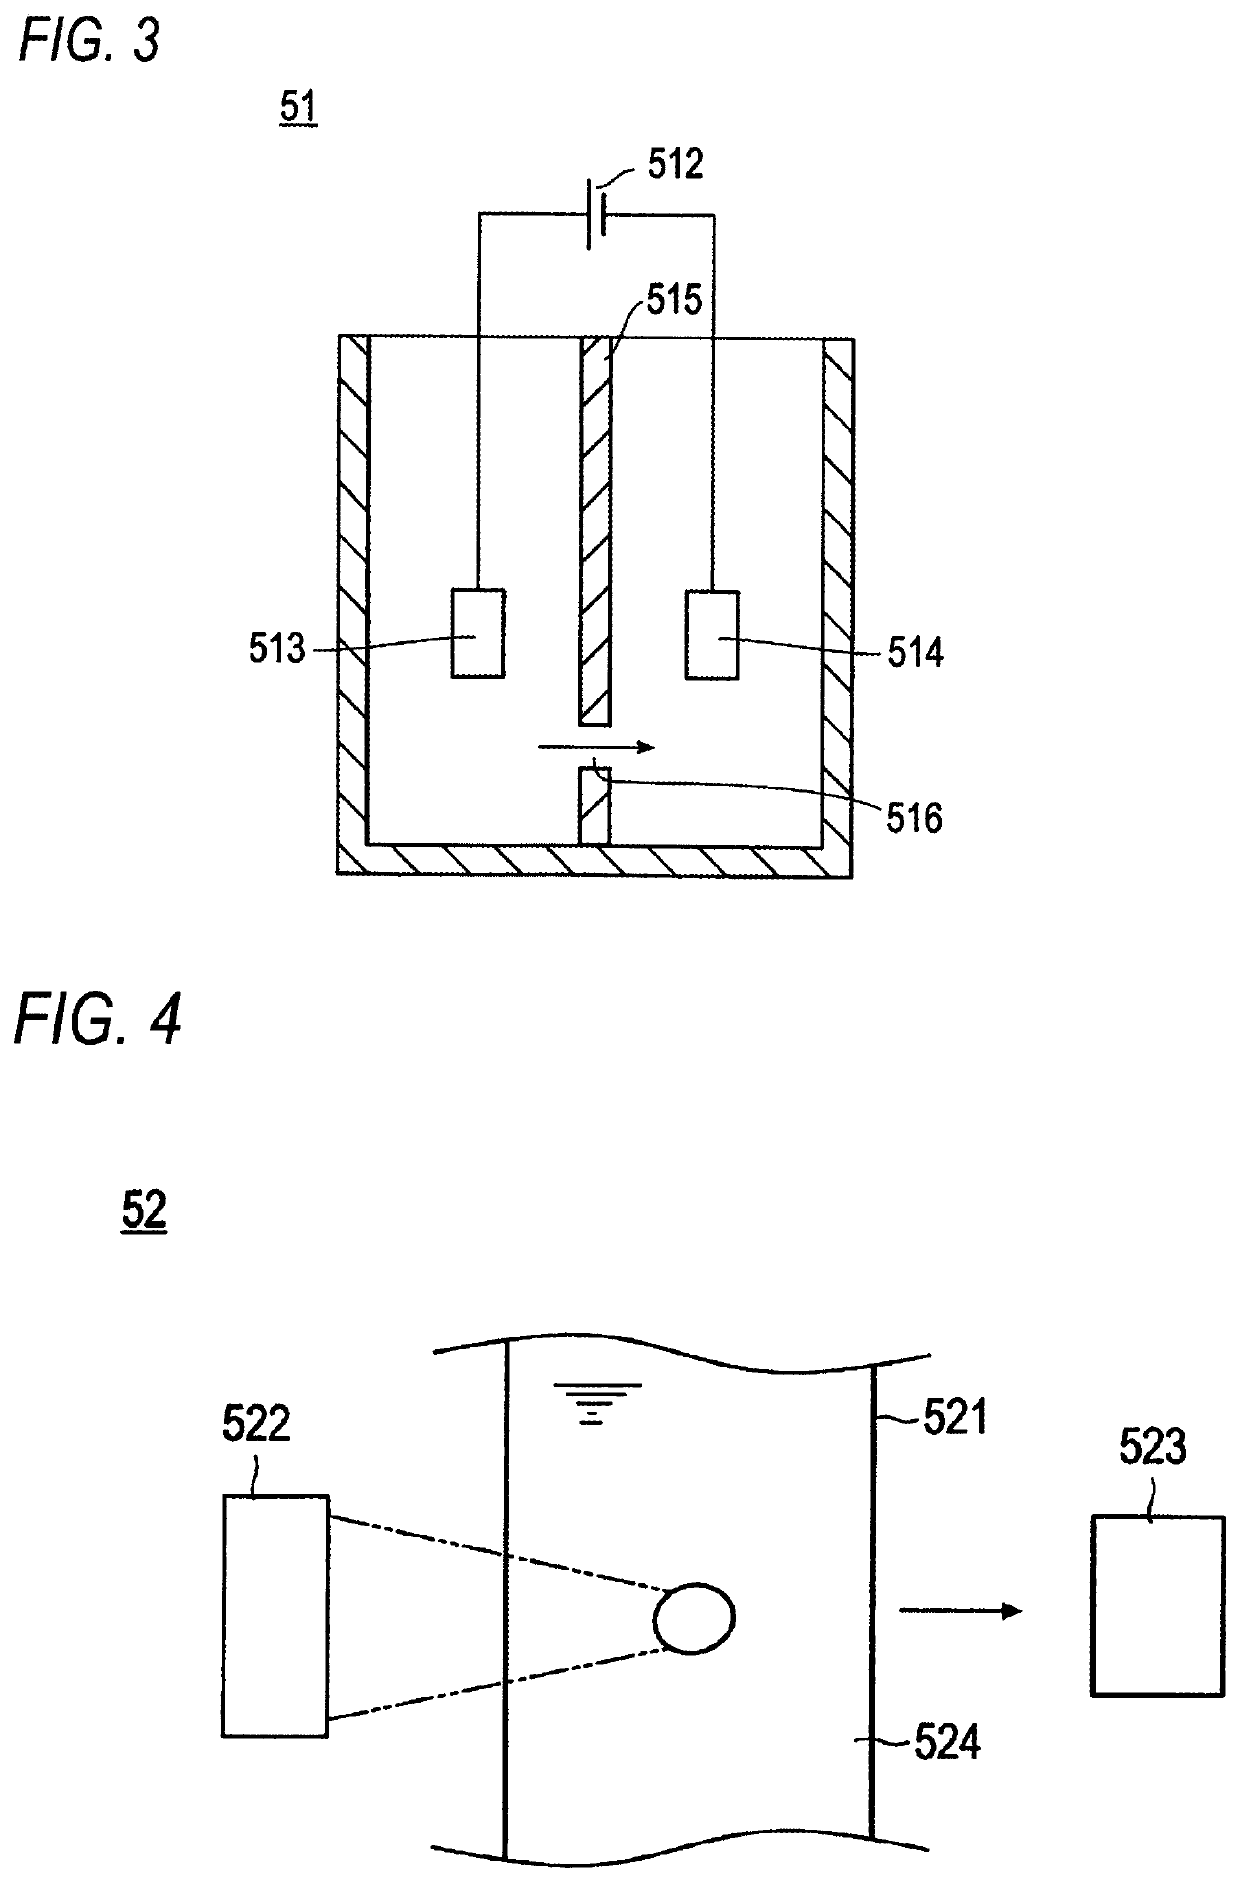 Method and apparatus for analyzing blood